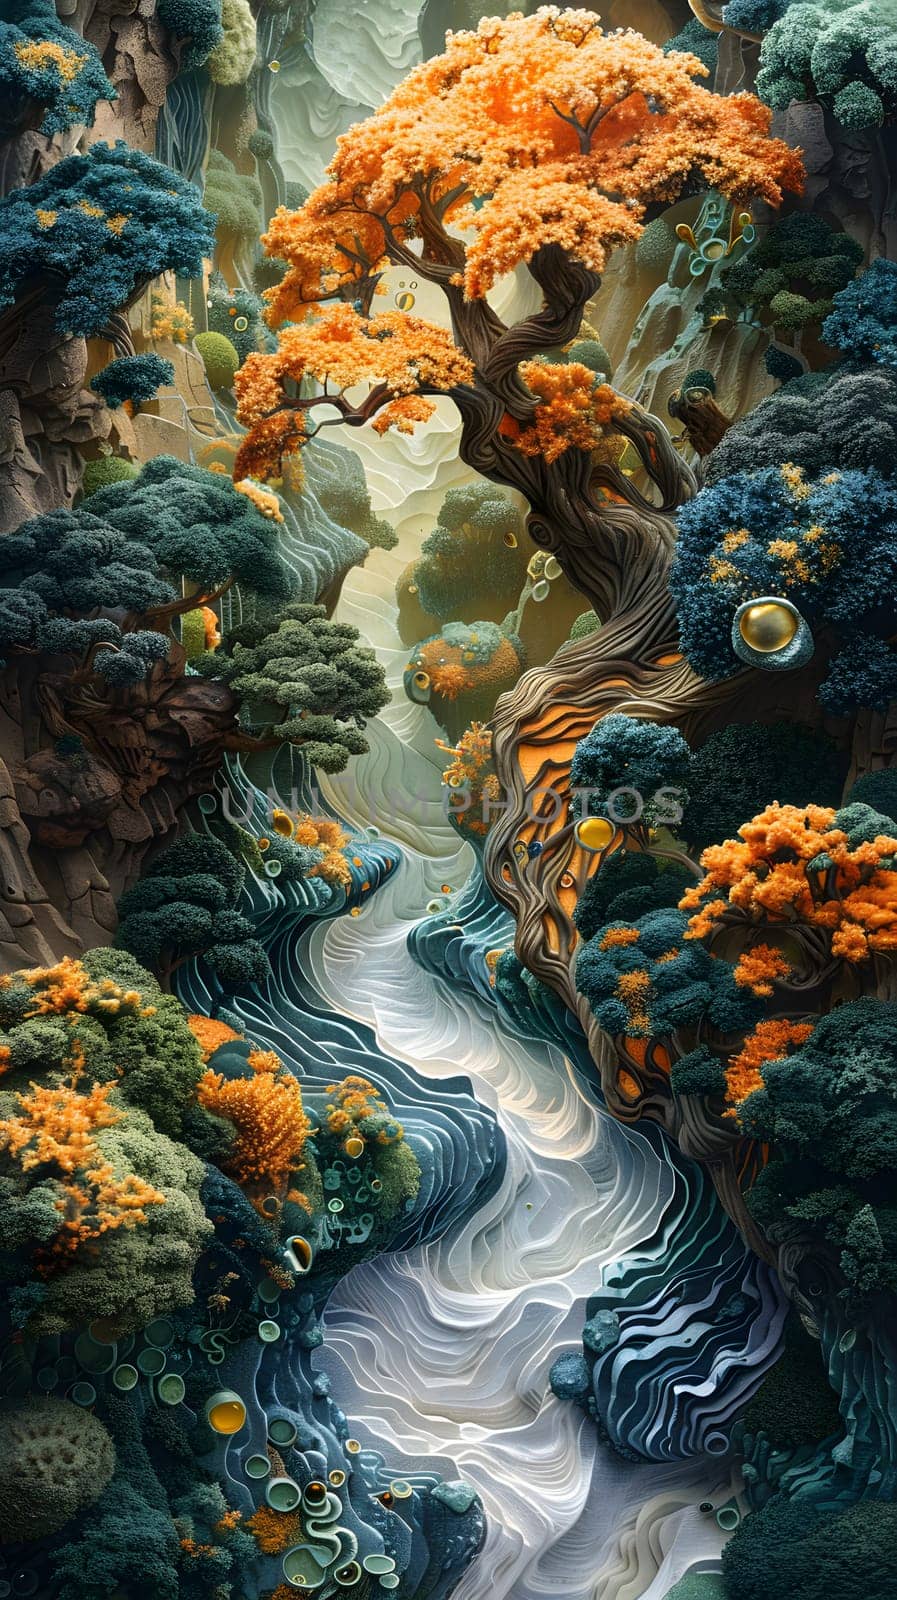 A captivating painting depicting a serene river meandering through a vibrant green forest, capturing the beauty of natural landscape through visual arts